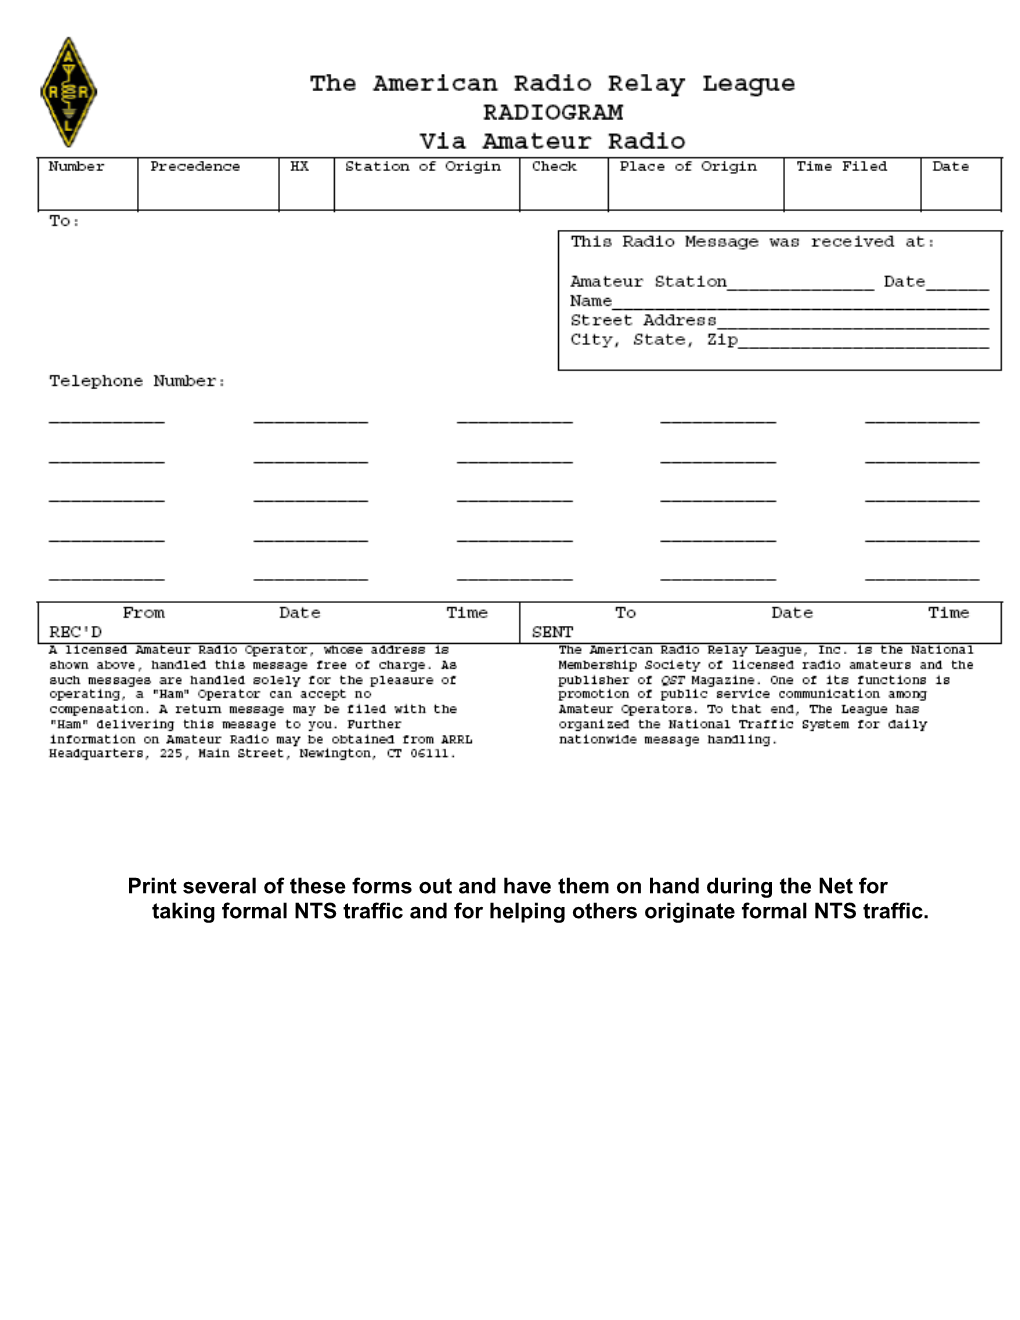 Print Several of These Forms out and Have Them on Hand During the Net for Taking Formal